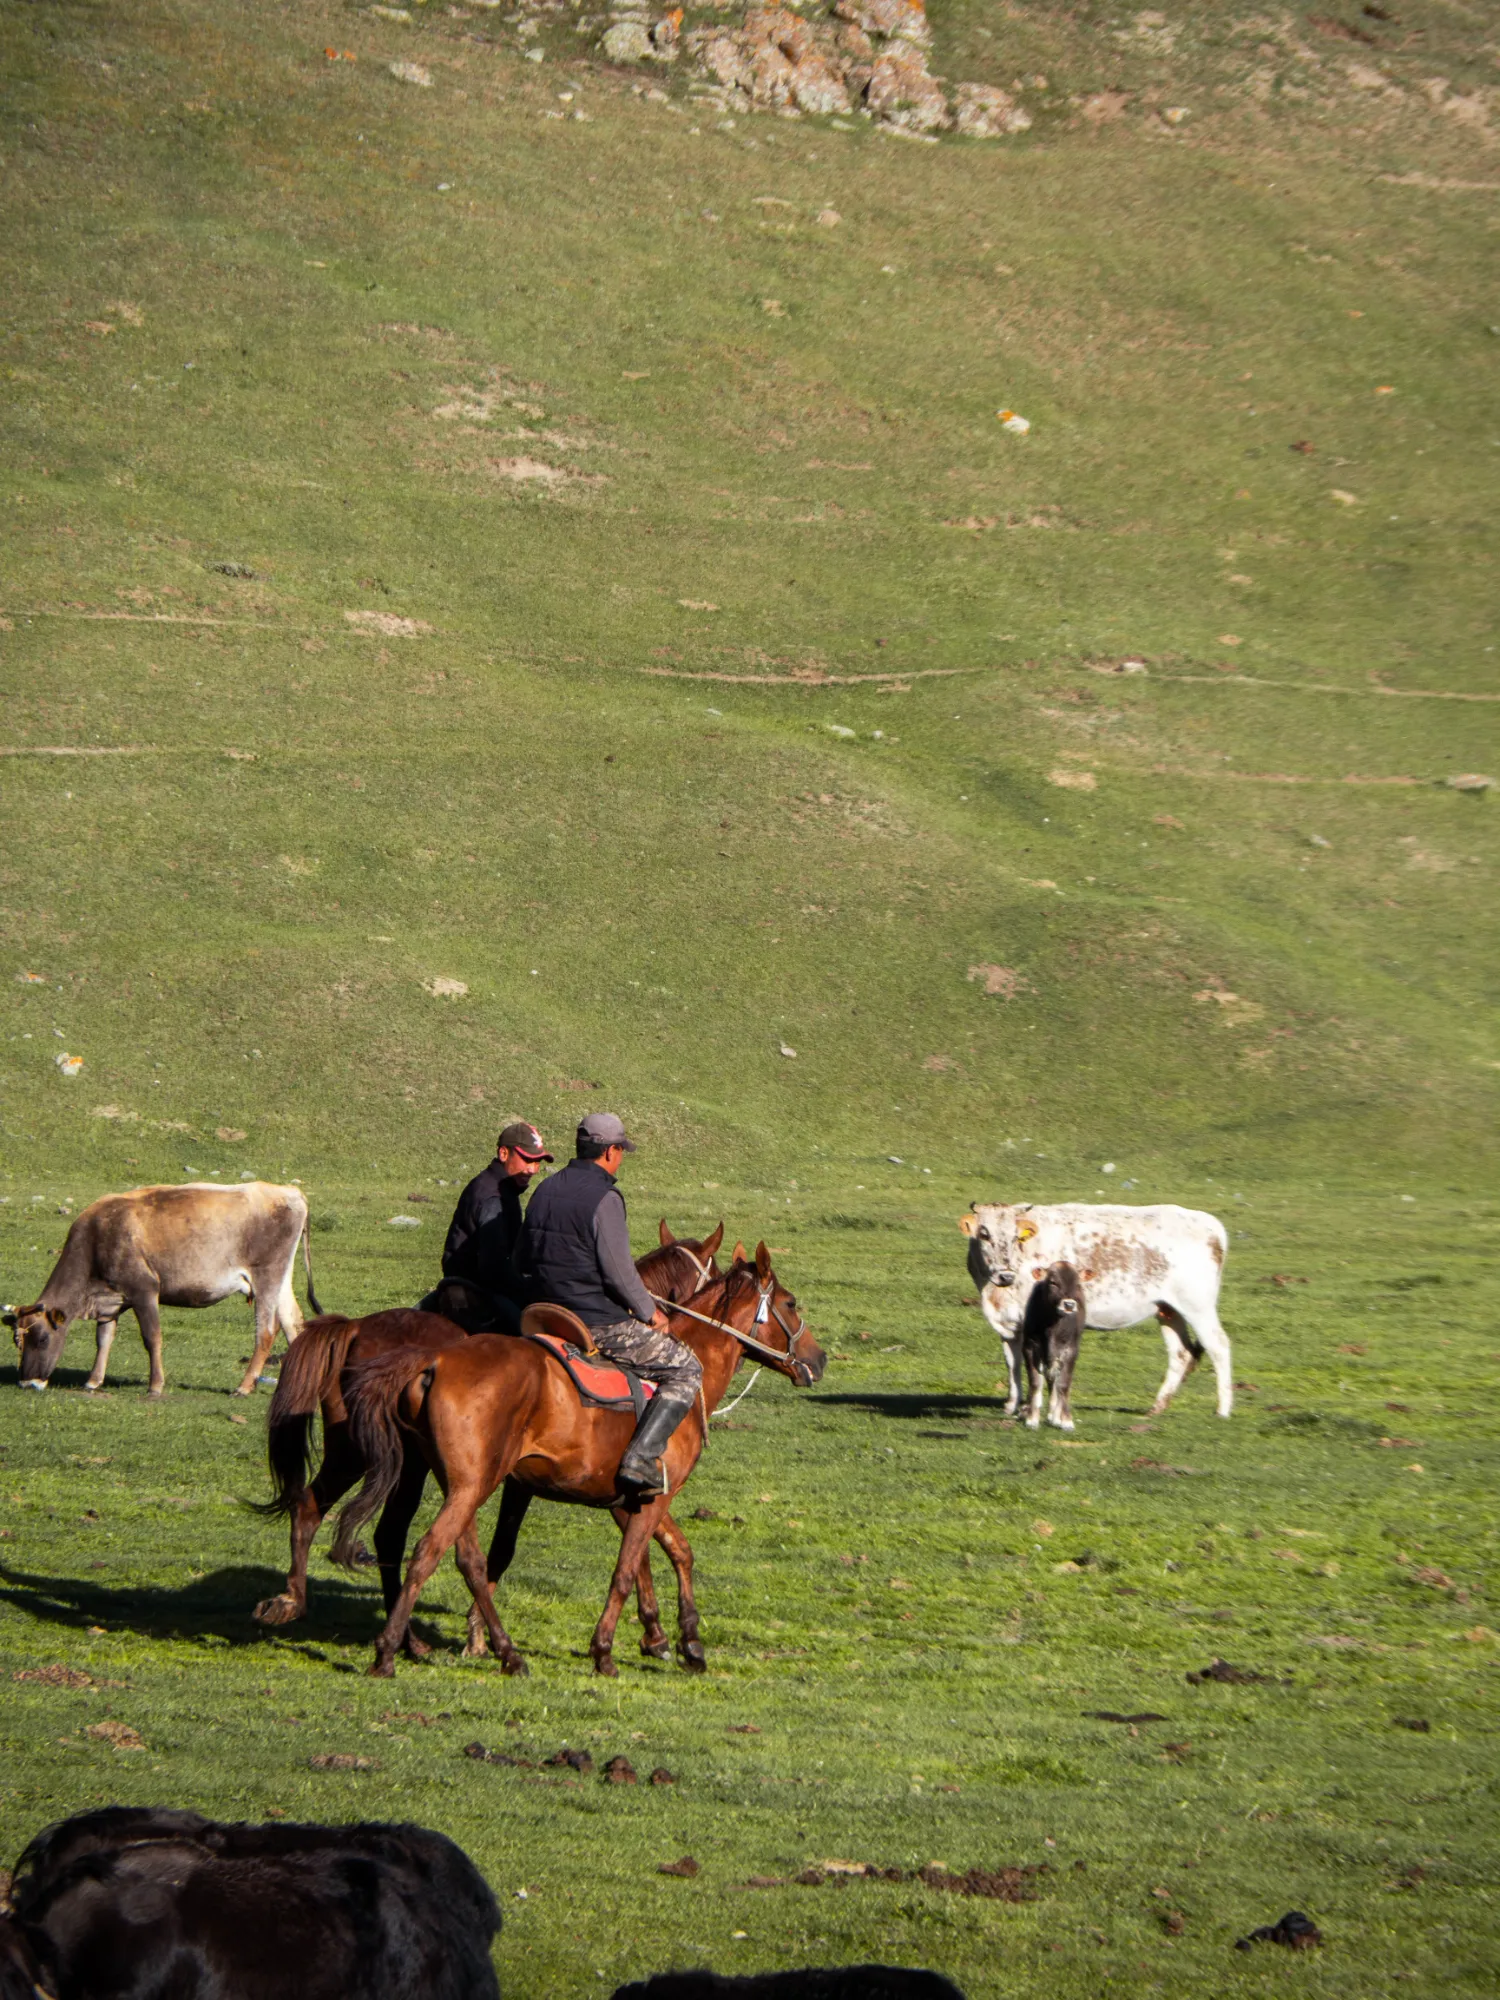 Nomads of Song-Kul